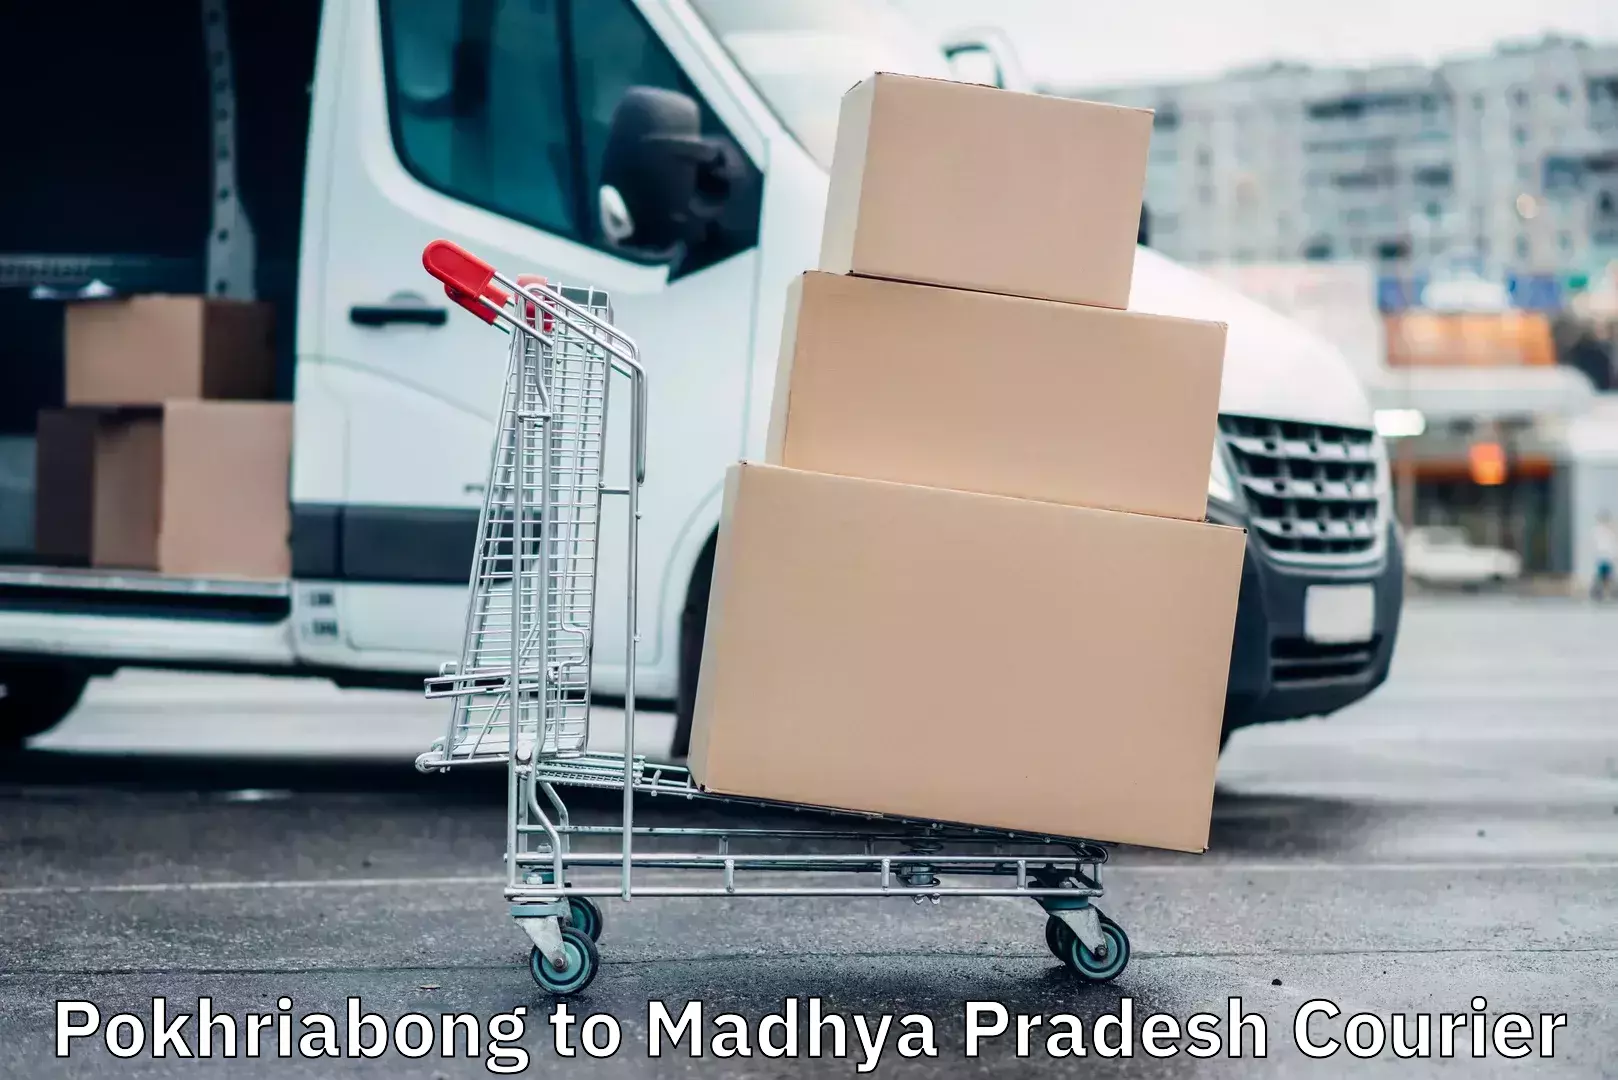 Full-service courier options in Pokhriabong to Madhya Pradesh